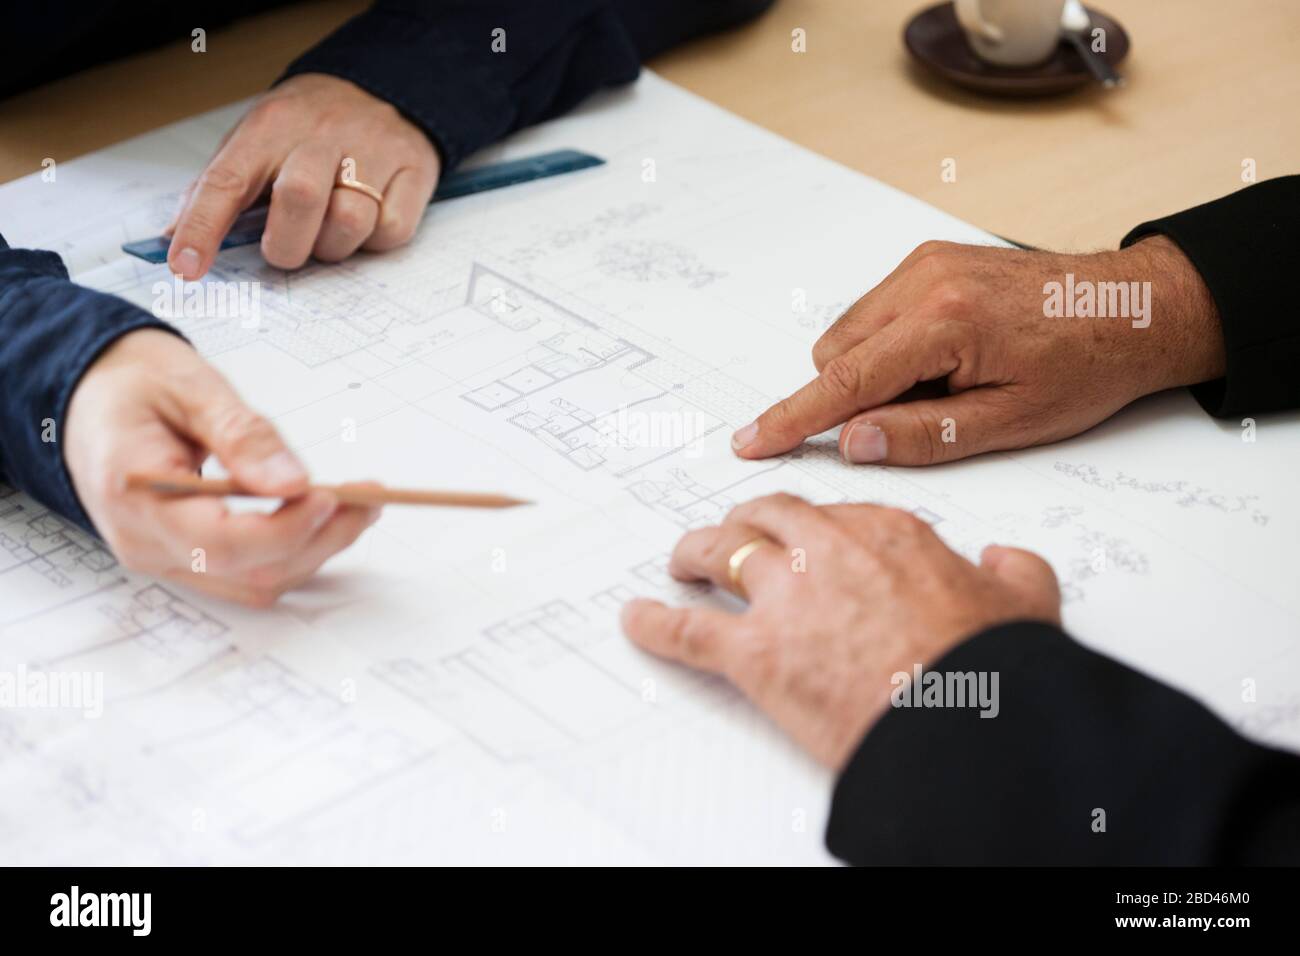 Architect working, architectural project, construction concept Stock Photo